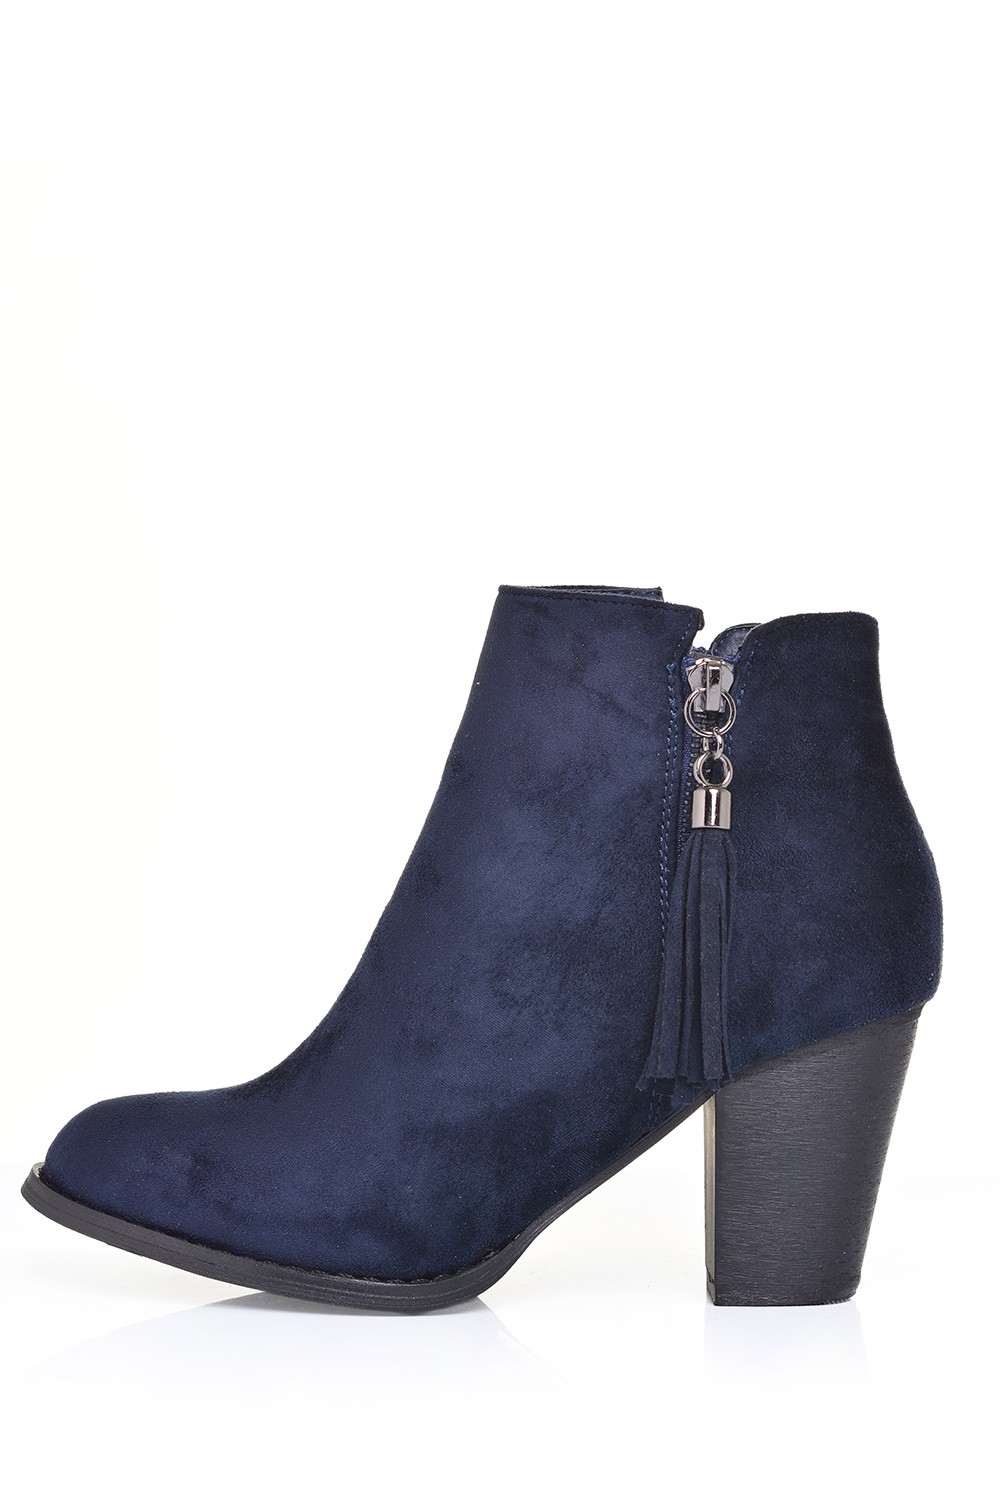 Sole City Katron Ankle Boot in Navy Suede | iCLOTHING